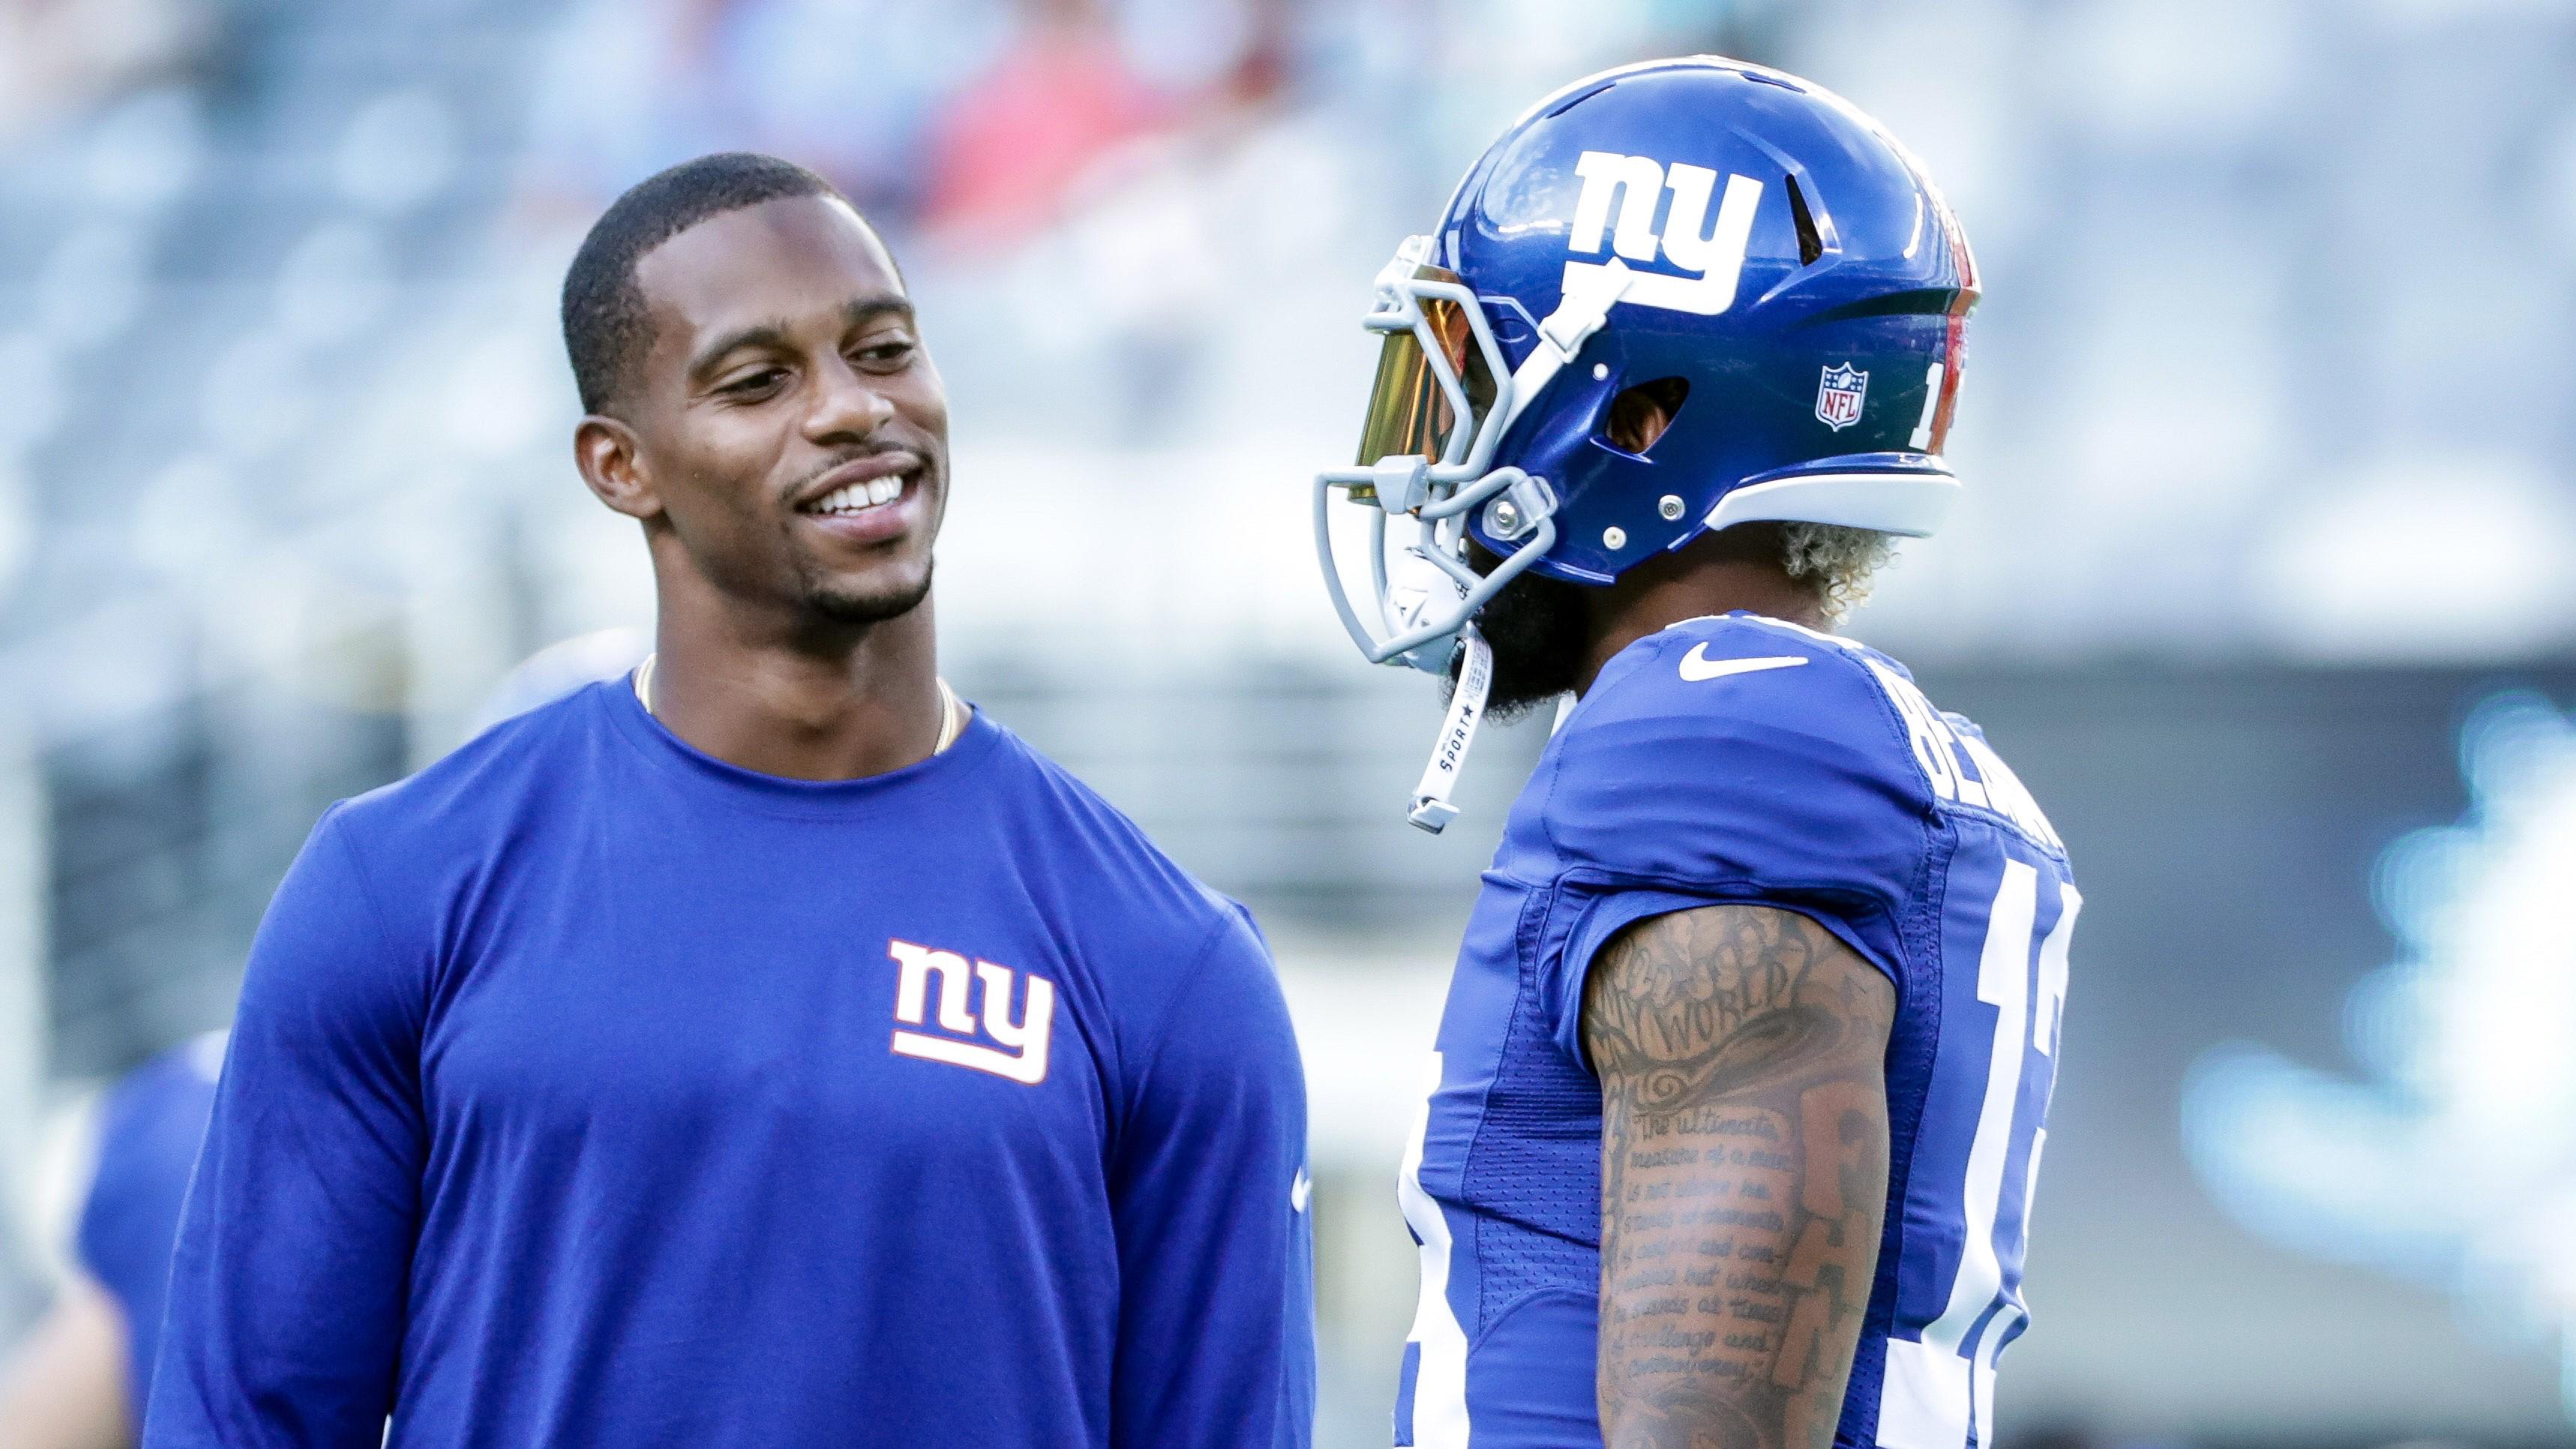 Aug 12, 2016; East Rutherford, NJ, USA; New York Giants wide receiver Victor Cruz (left) and wide receiver Odell Beckham (13) before the preseason game at MetLife Stadium. Mandatory Credit: Vincent Carchietta-USA TODAY Sports / Vincent Carchietta-USA TODAY Sports